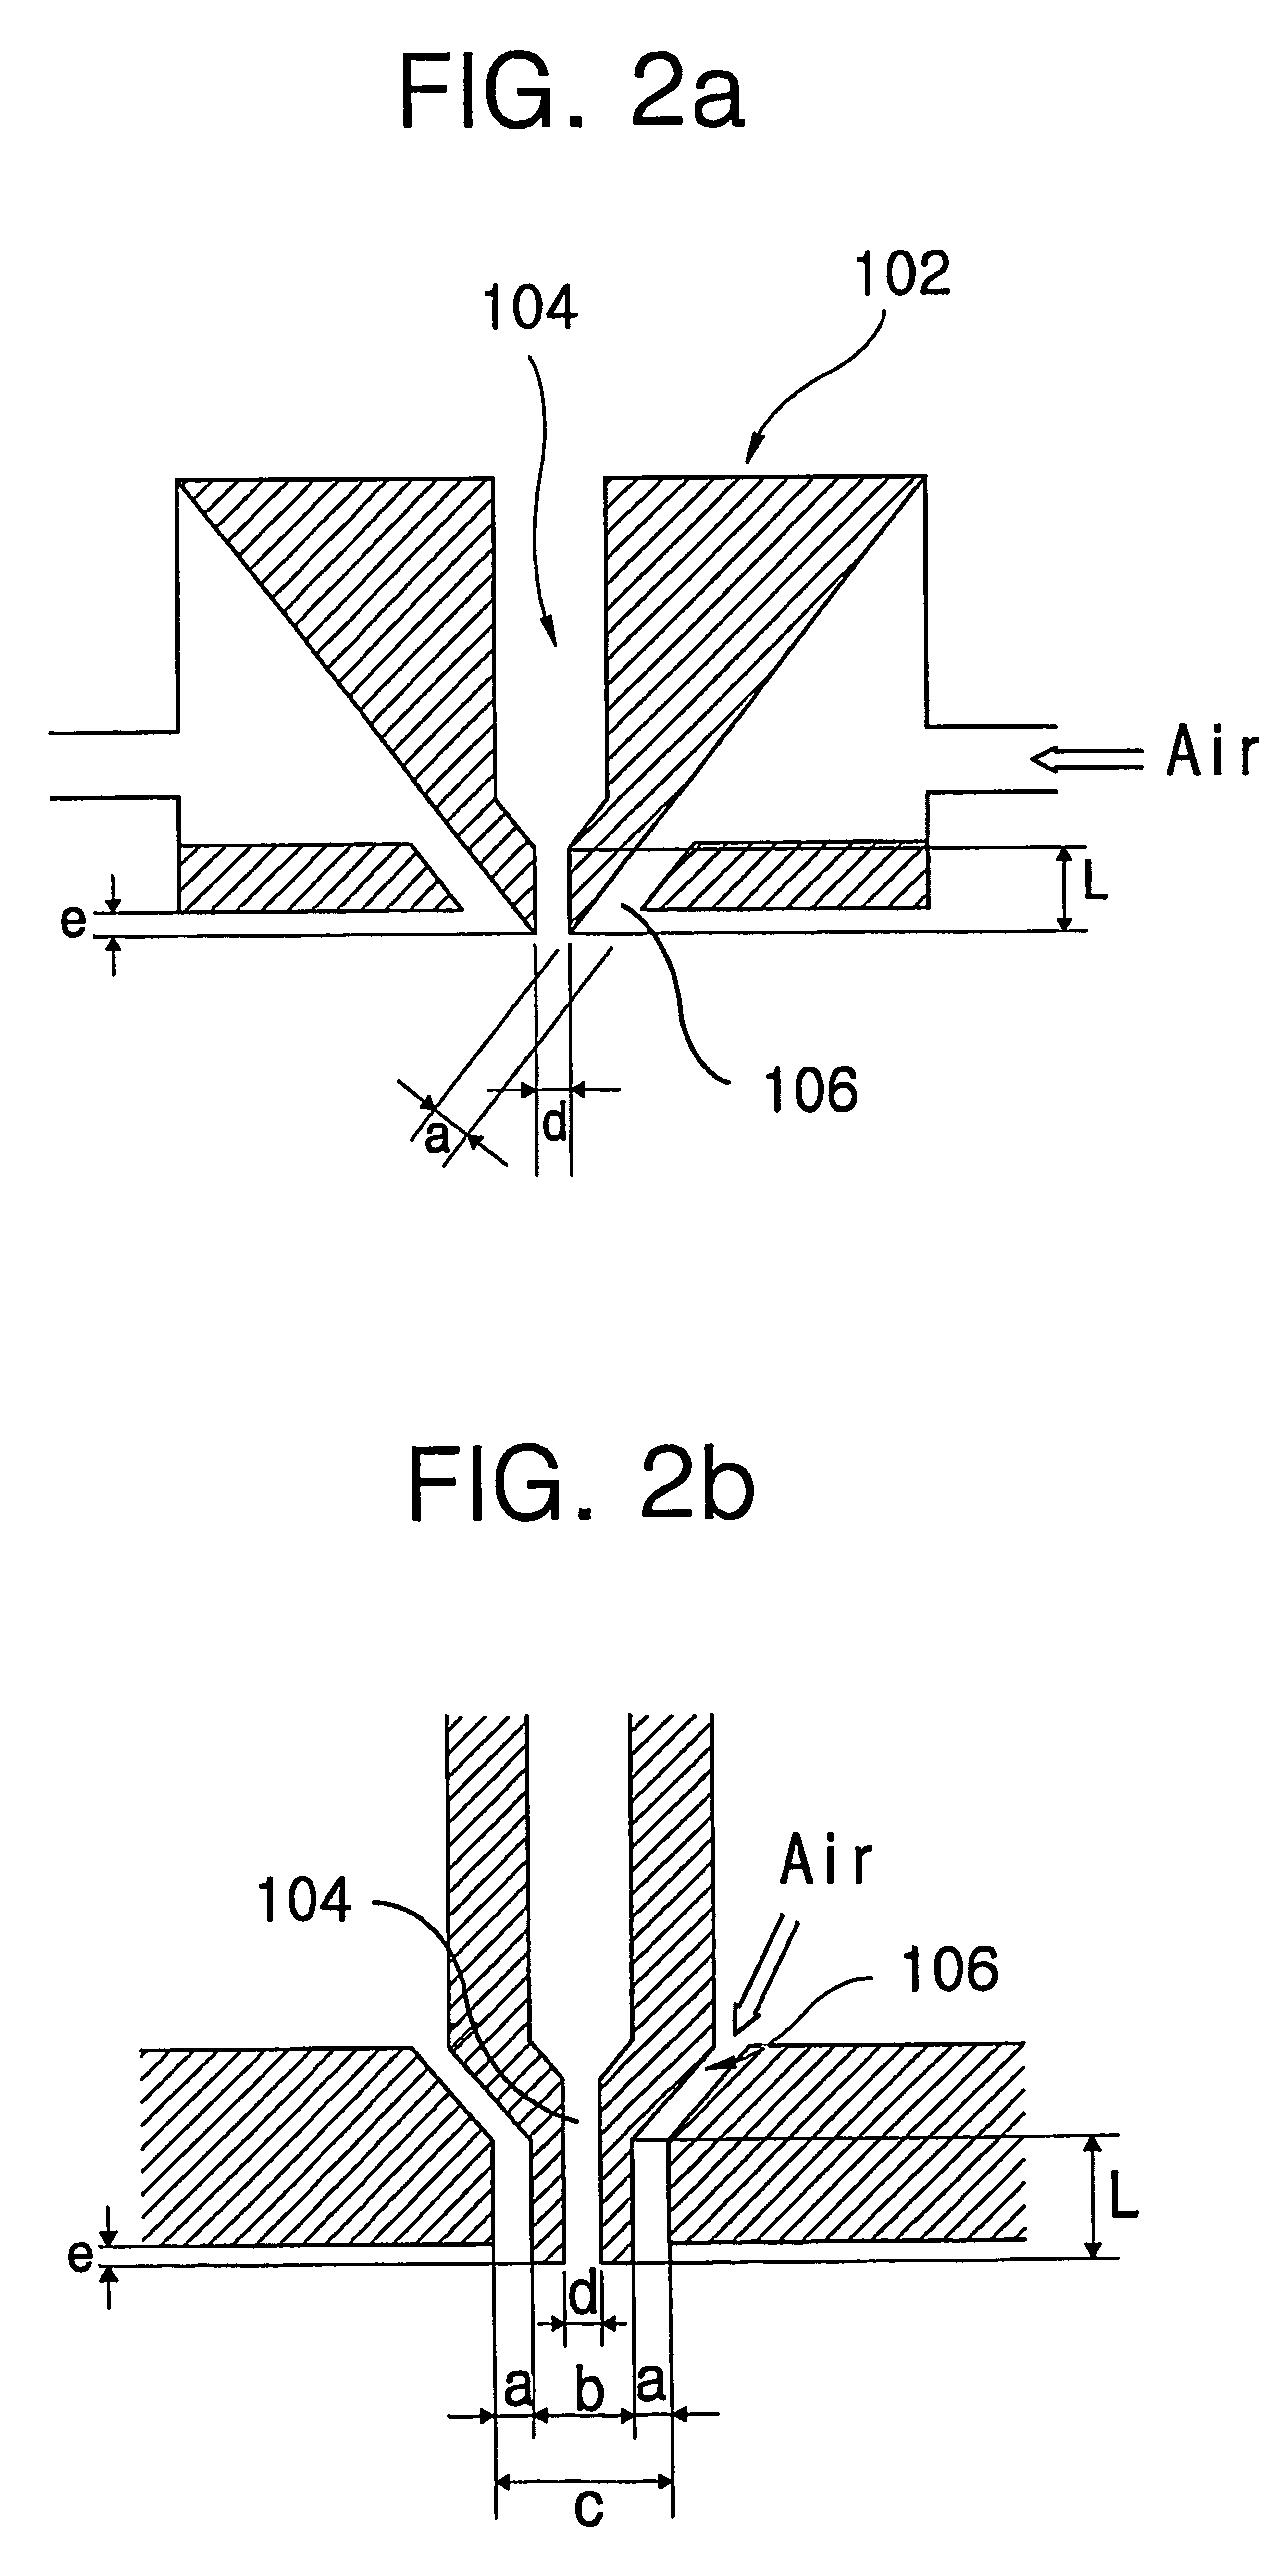 Manufacturing device and the method of preparing for the nanofibers via electro-blown spinning process